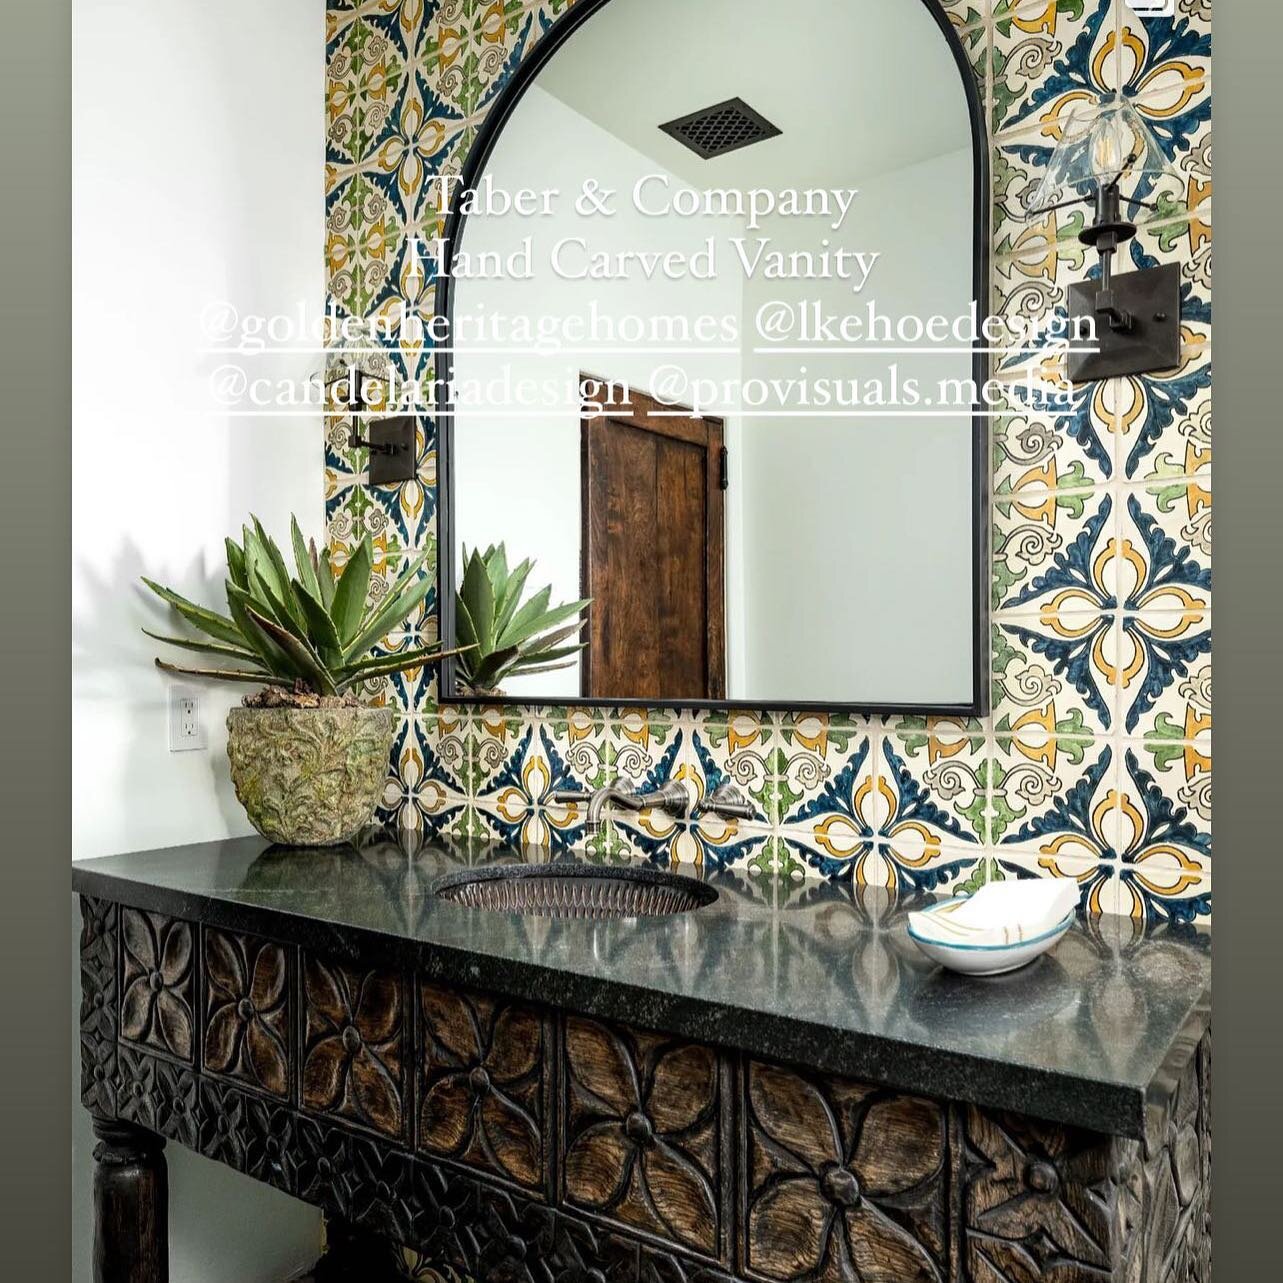 @provisuals.media Beautifully captured this hacienda style home. We created the front door with hand carving as well as the carved vanity and hand forged iron hood. We worked with a very talented team @candelariadesign @goldenheritagehomes @lkehoedes